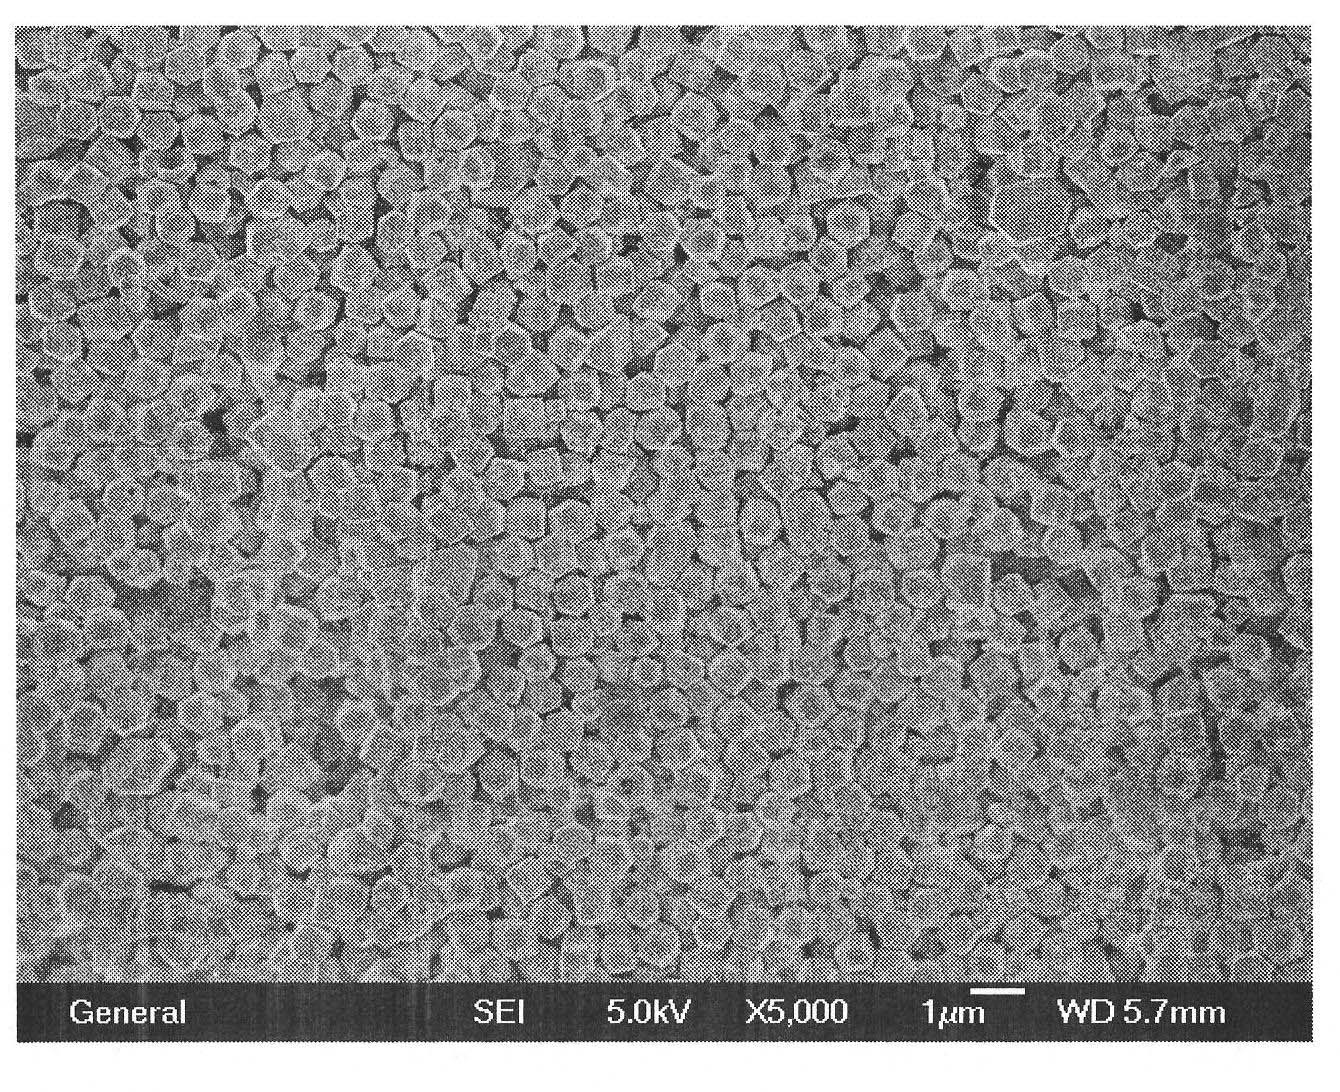 Rare earth garnet type ferrite compound and preparation method thereof